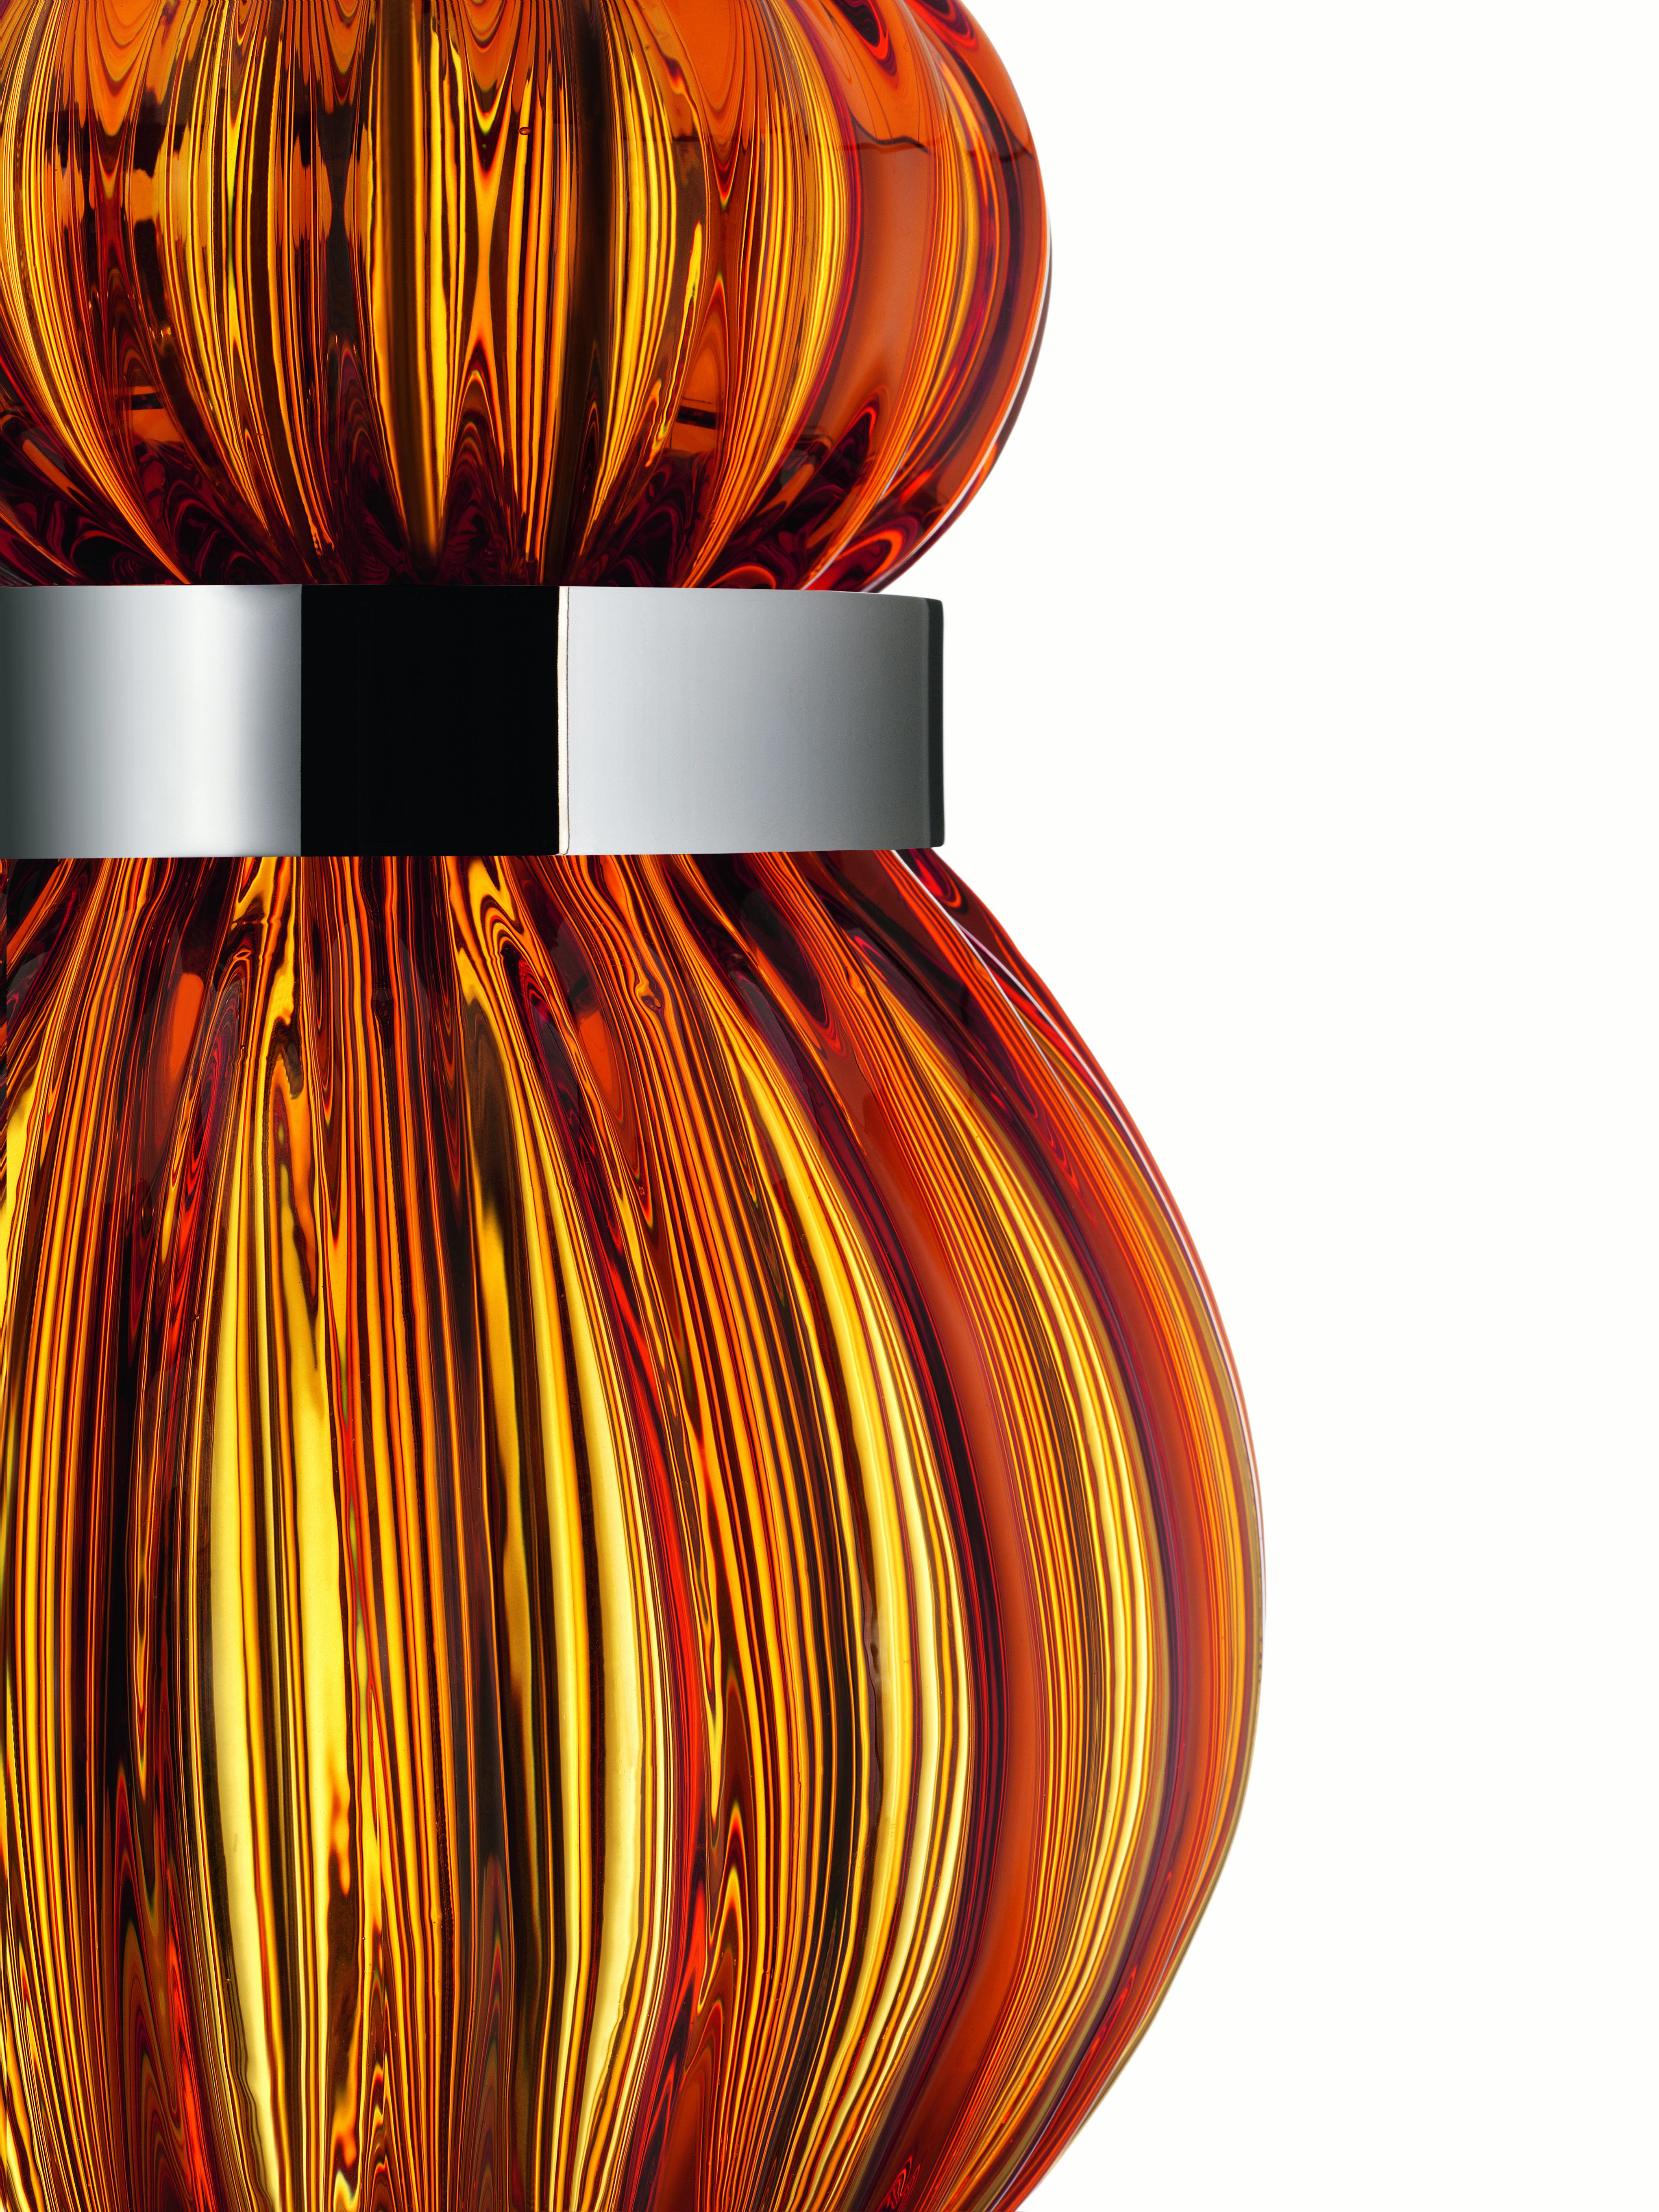 Orange (Caramel_CA) Medina 5683 Wall Sconce in Glass with Brown Shade by, Barovier&Toso 5